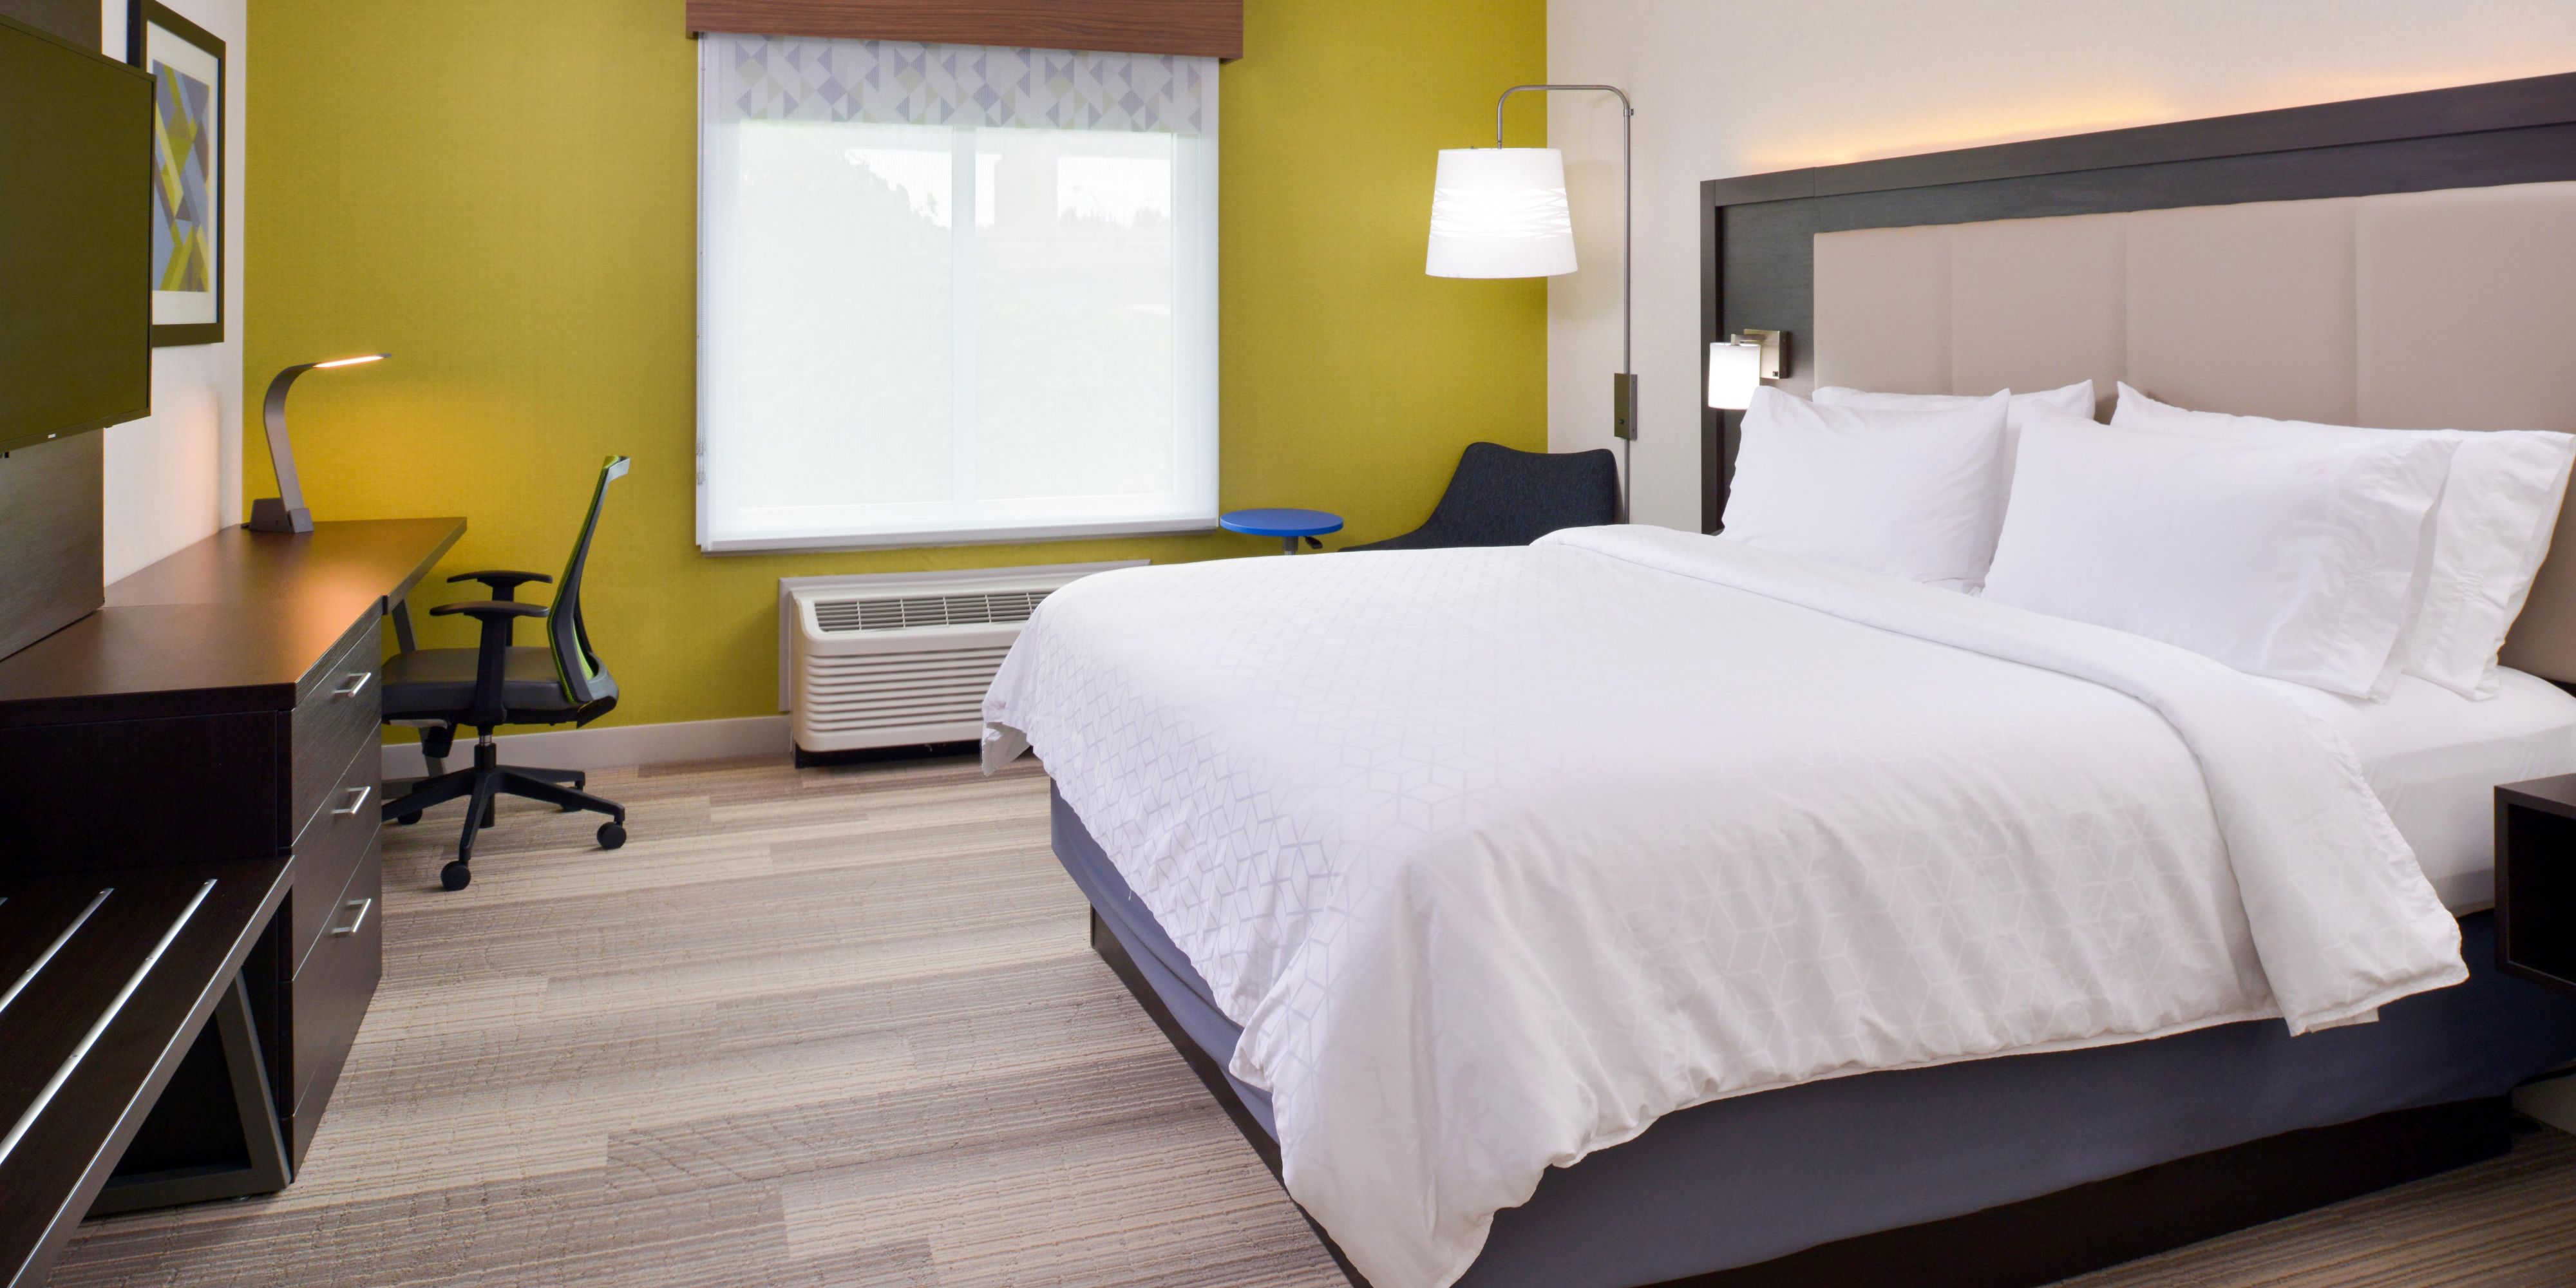 Come lay down on our brand new pillow top mattresses and rest the night away. 